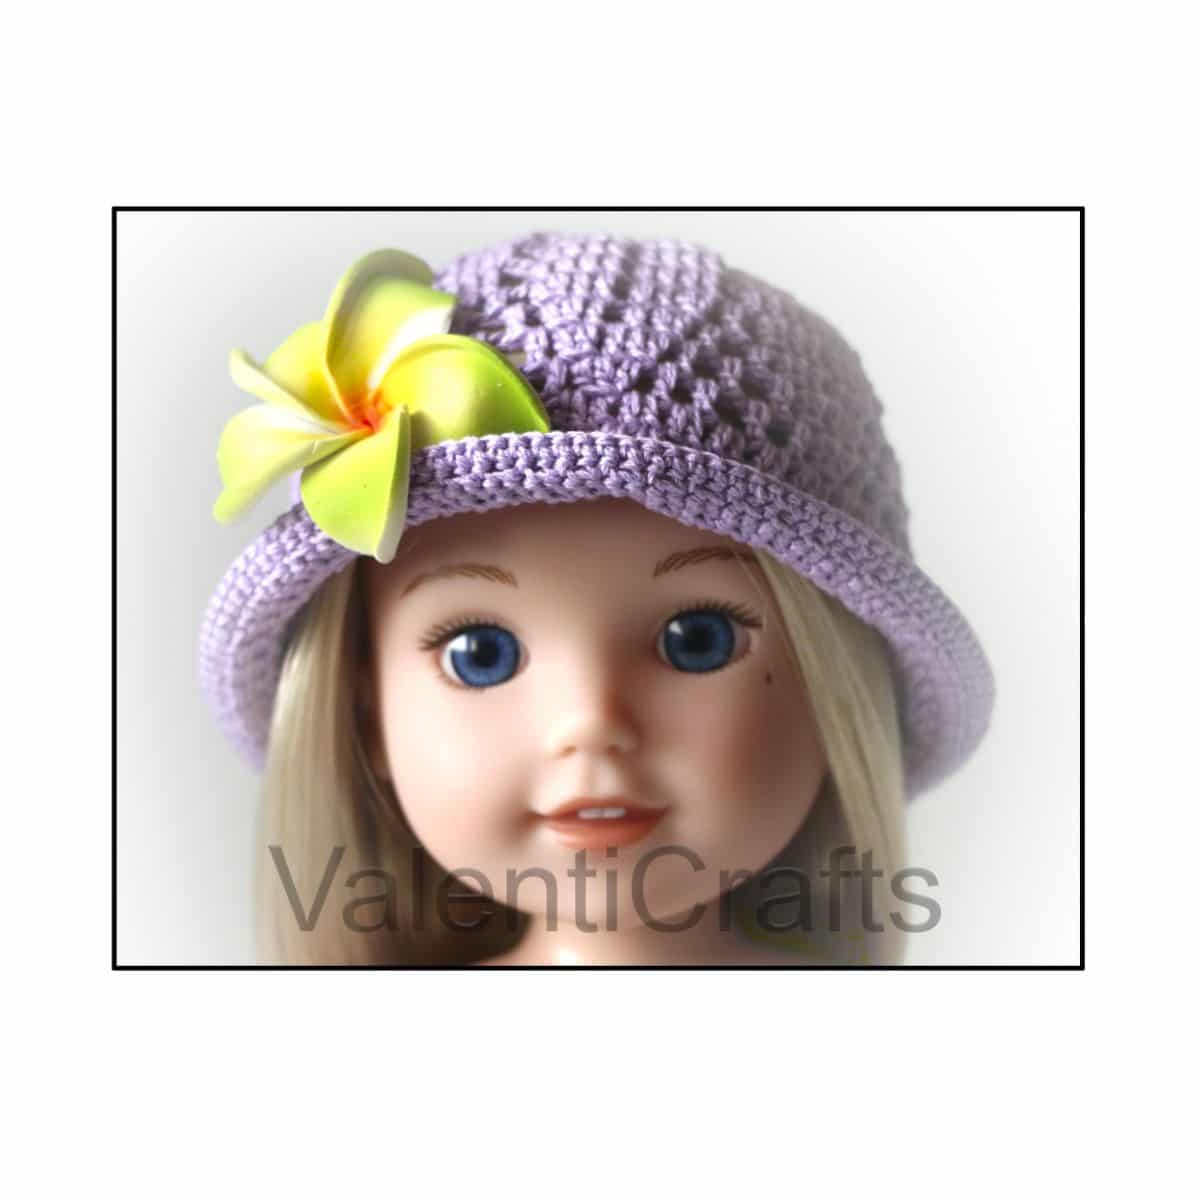 Blonde doll wearing a purple crochet hat with a yellow and green lily on the side on a white background.